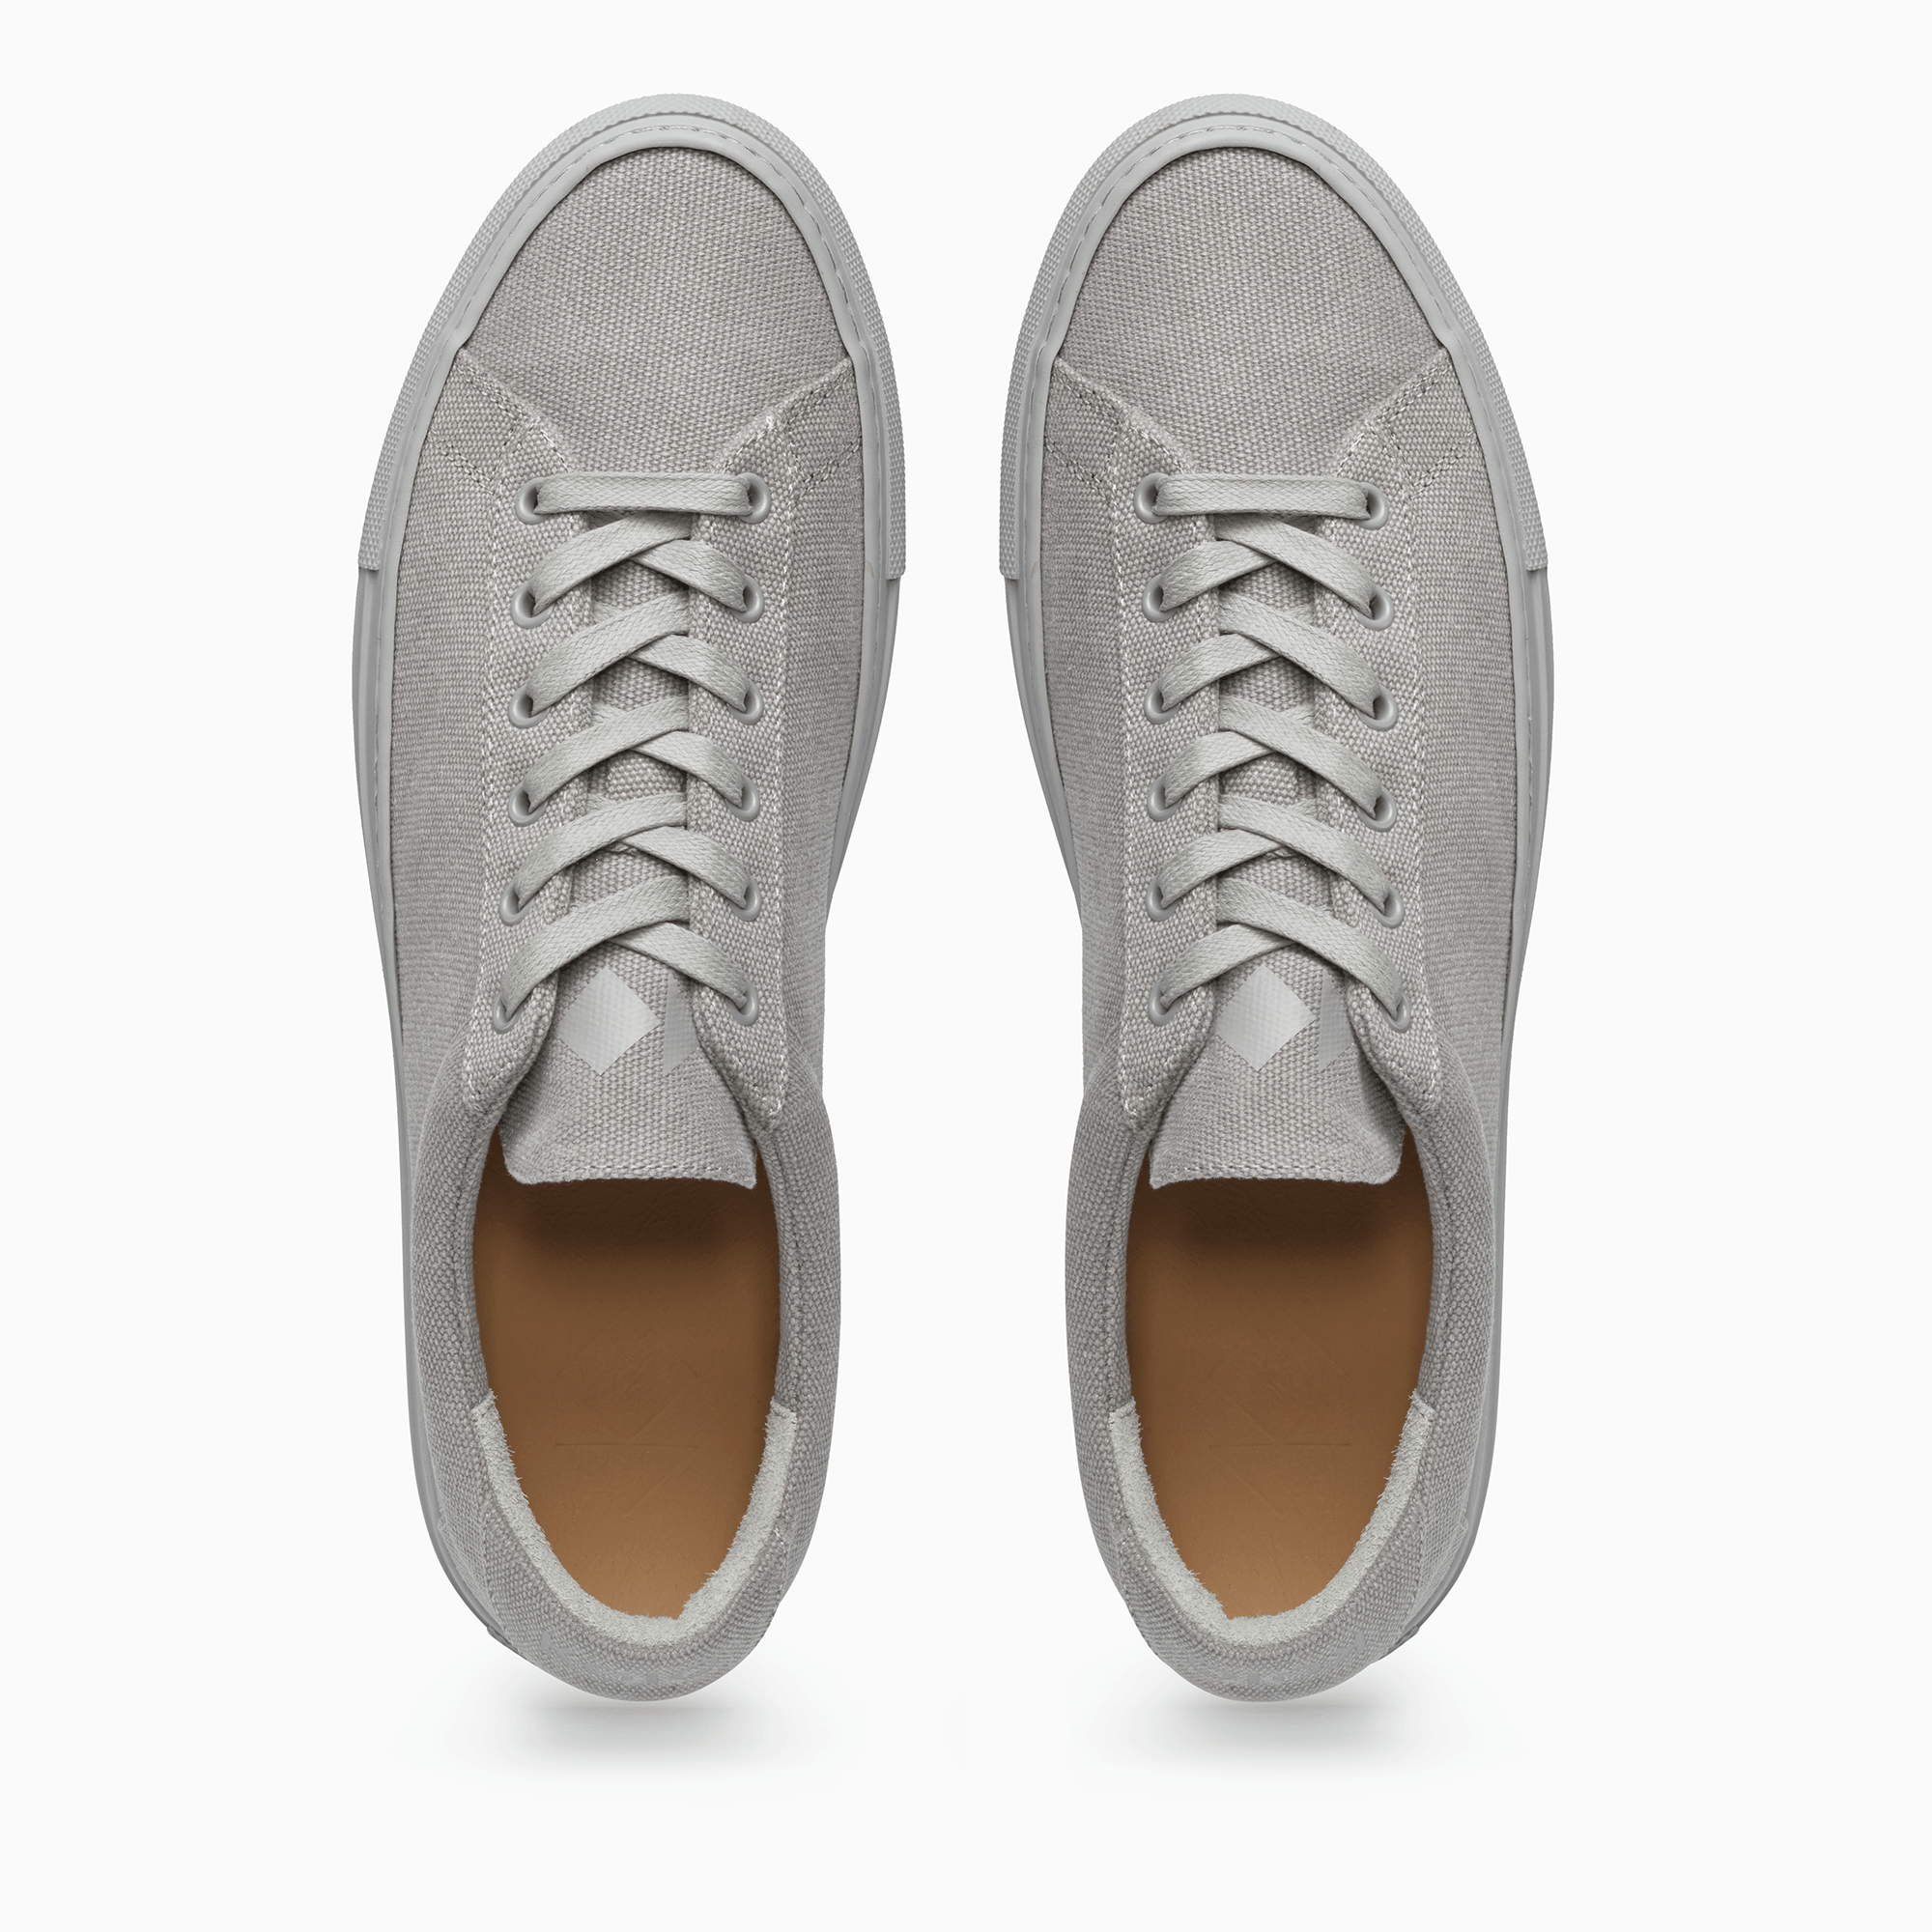  Grey Low Top Canvas Sneaker white sole  Womens Koio